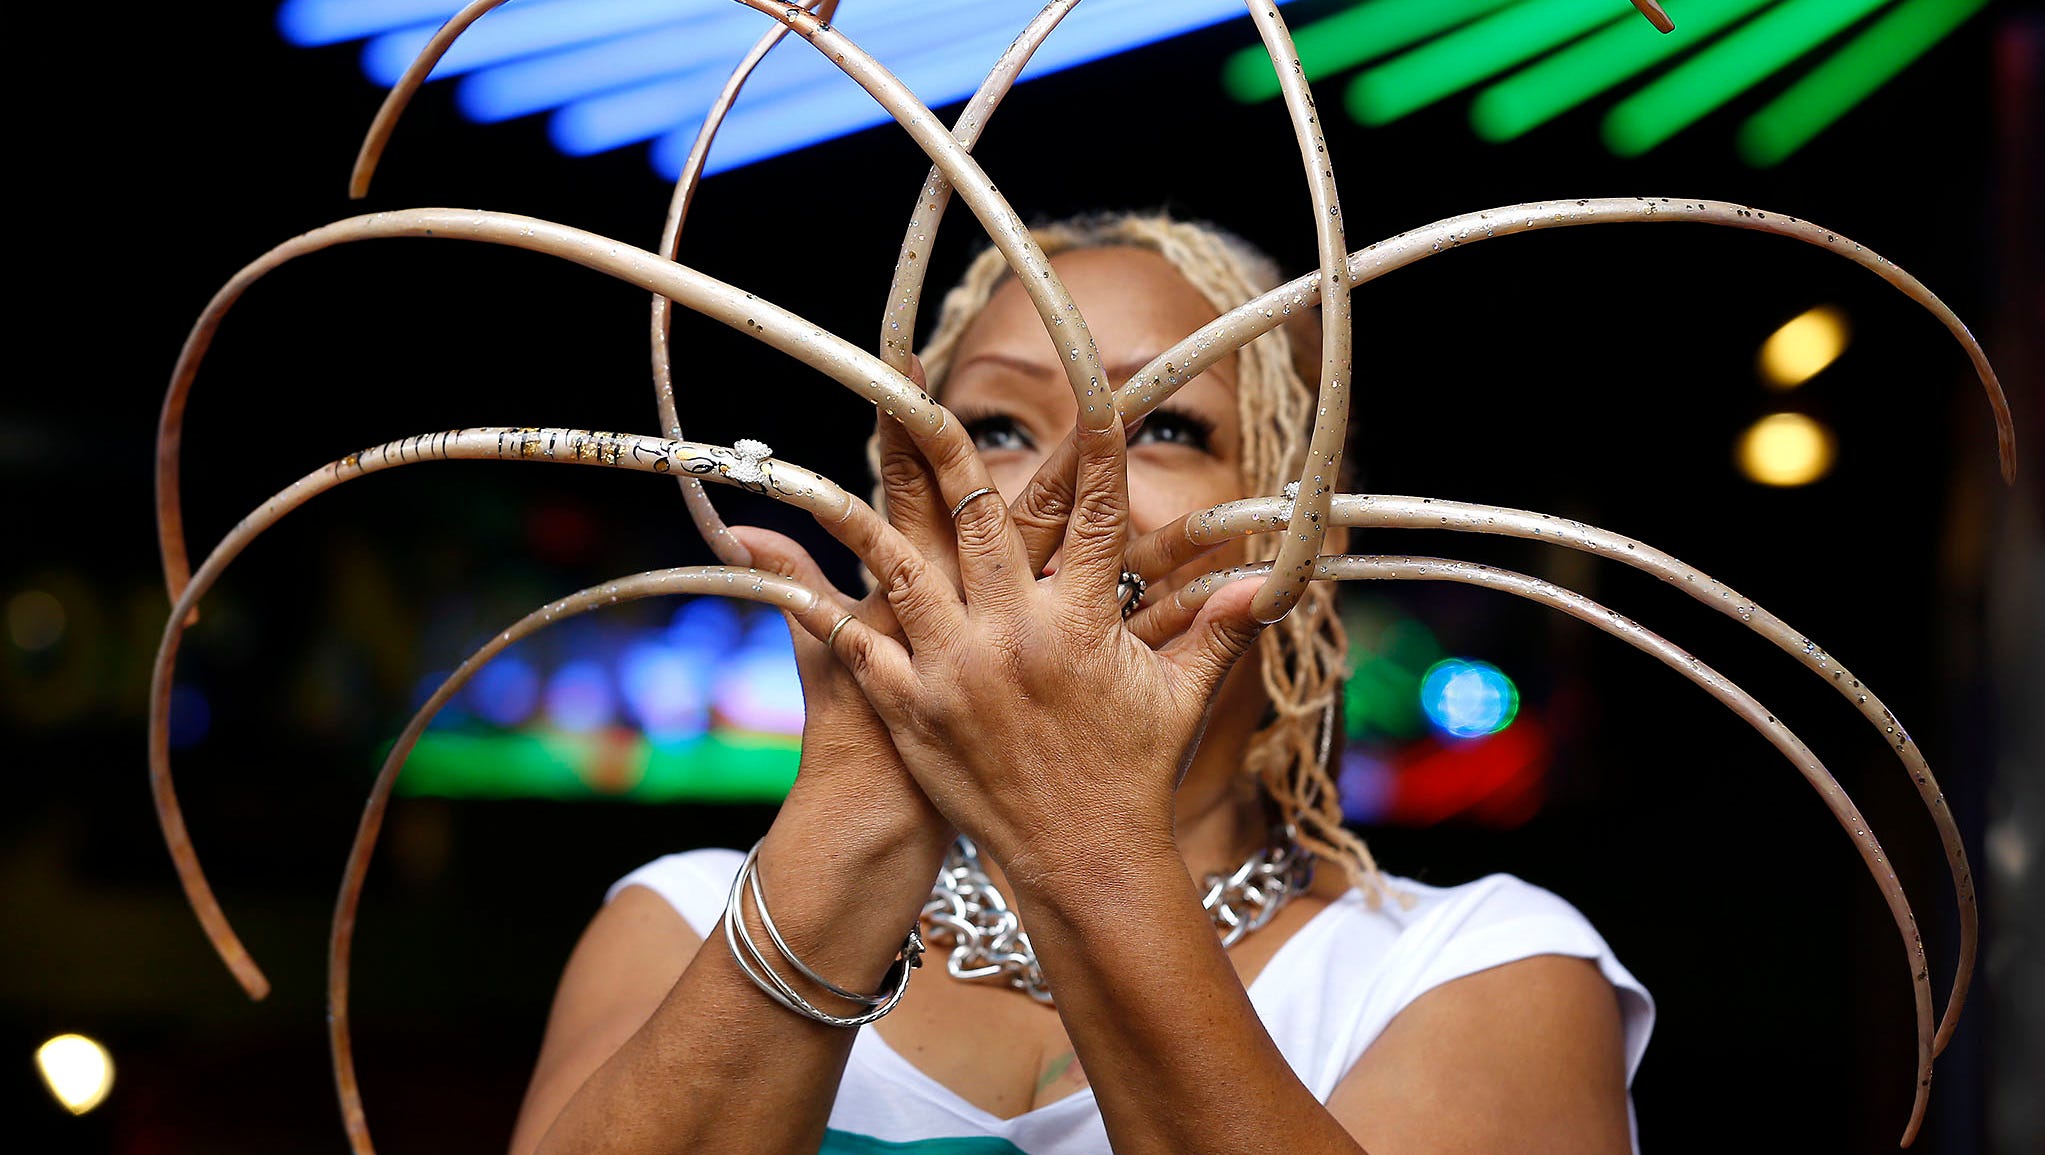 Ayanna Williams breaks Guinness World Record with longest nails